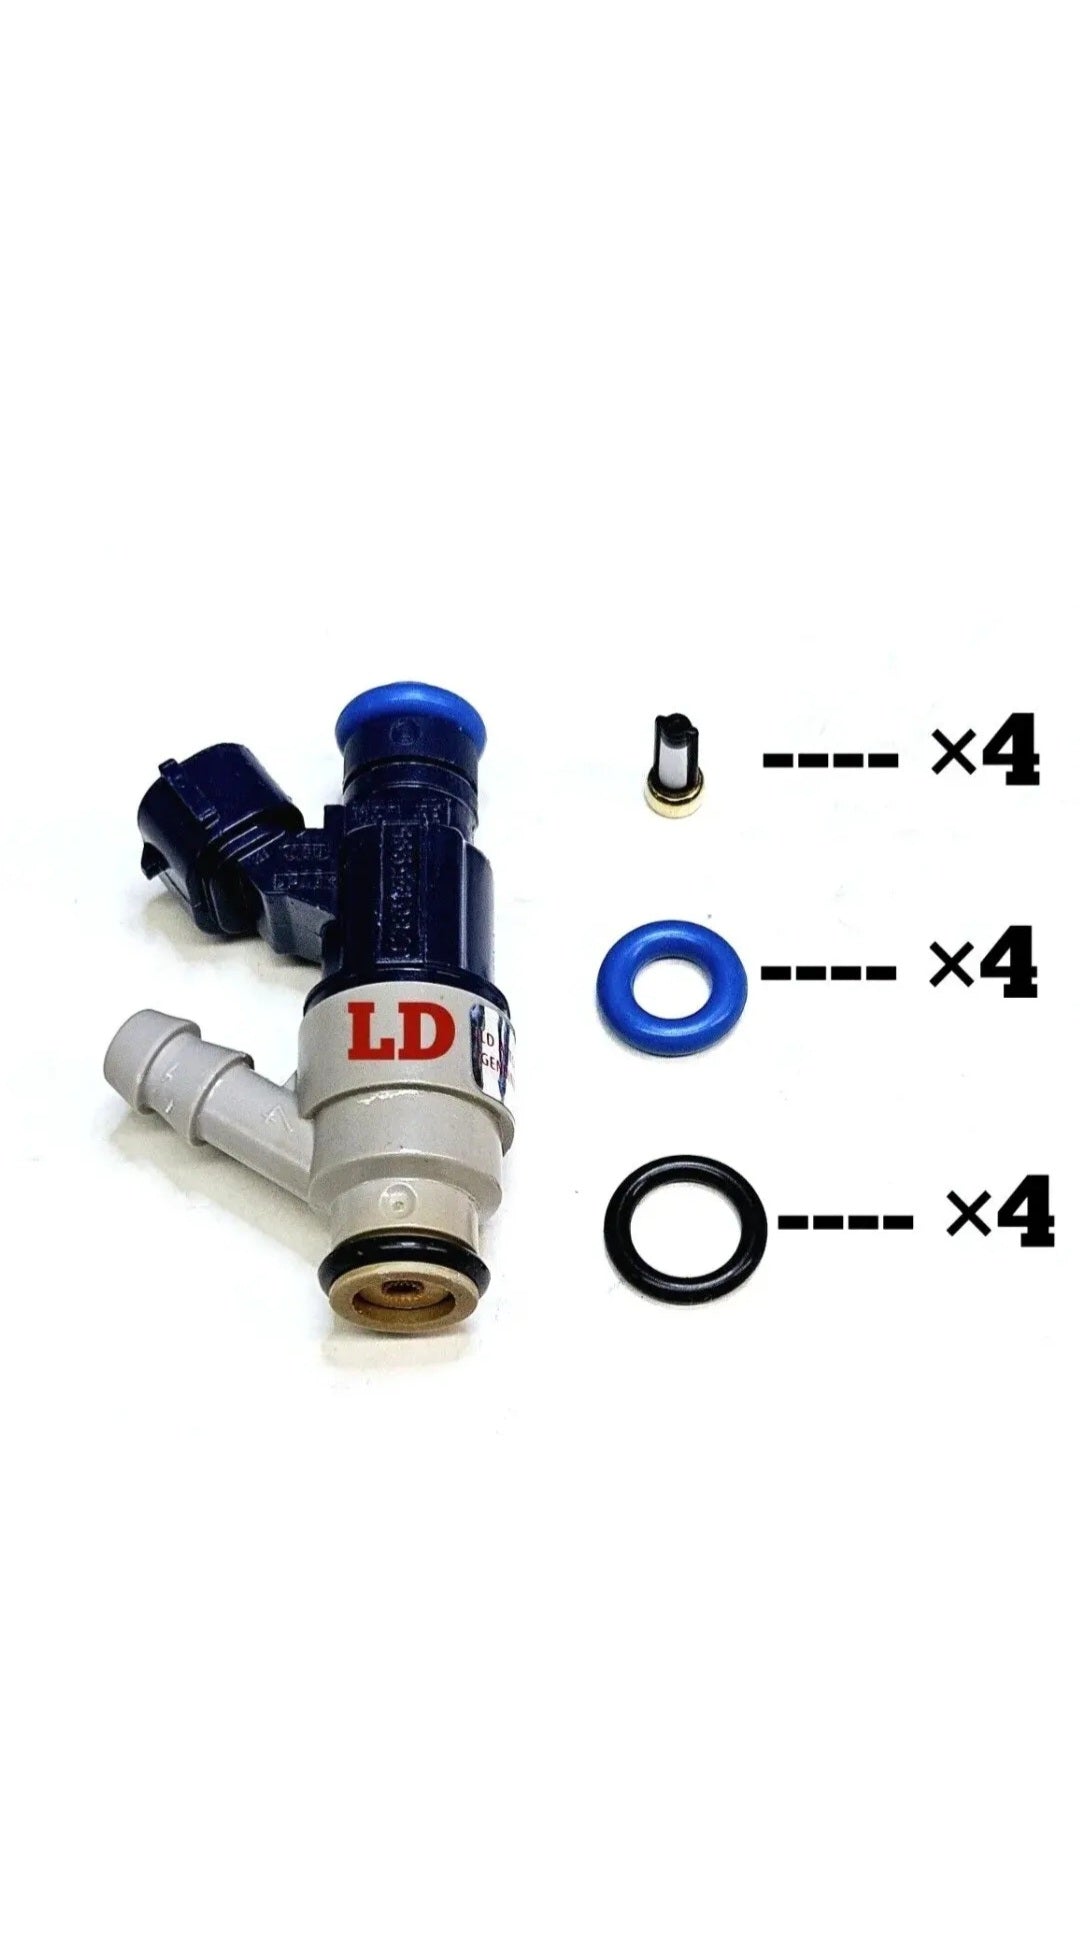 Injector repair kit for 0280155995 / 06A906031AC